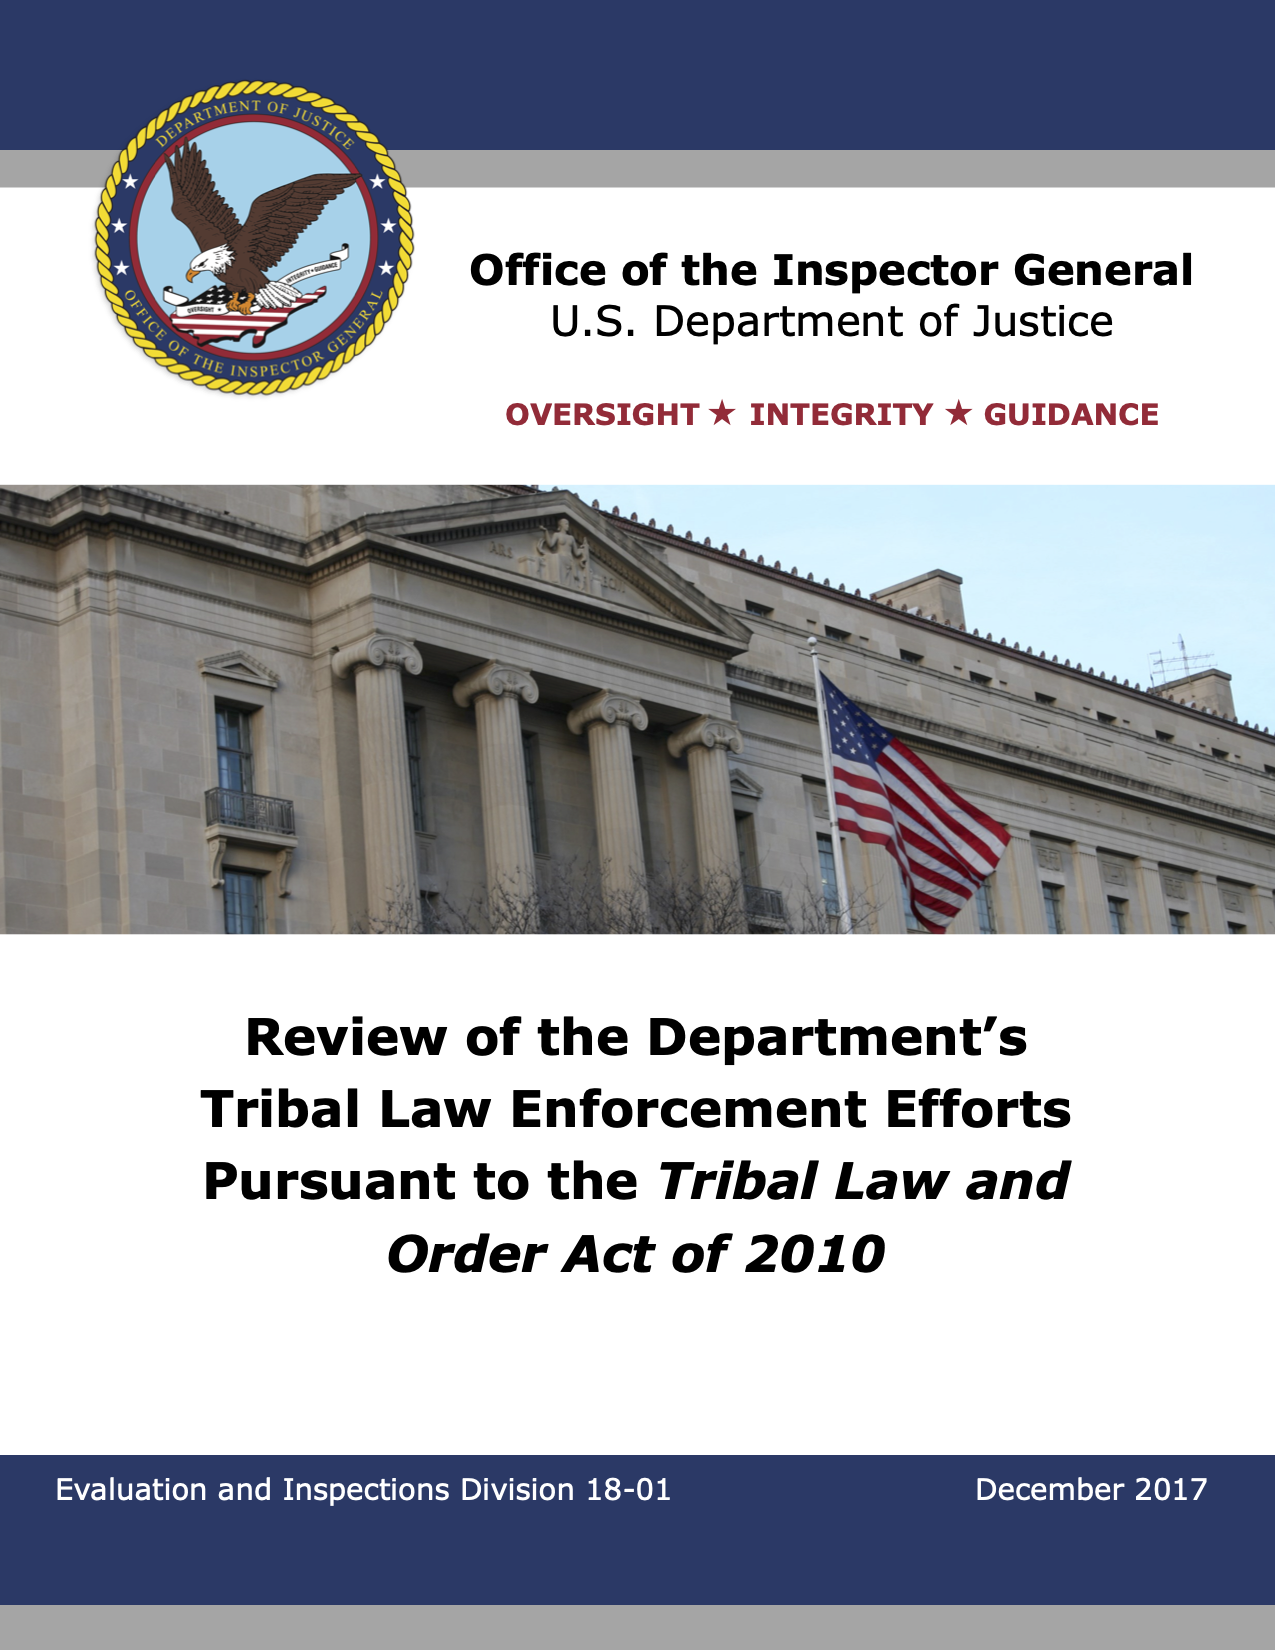 Review of the Department's Tribal Law Enforcement Efforts Pursuant to the Tribal Law and Order Act of 2010